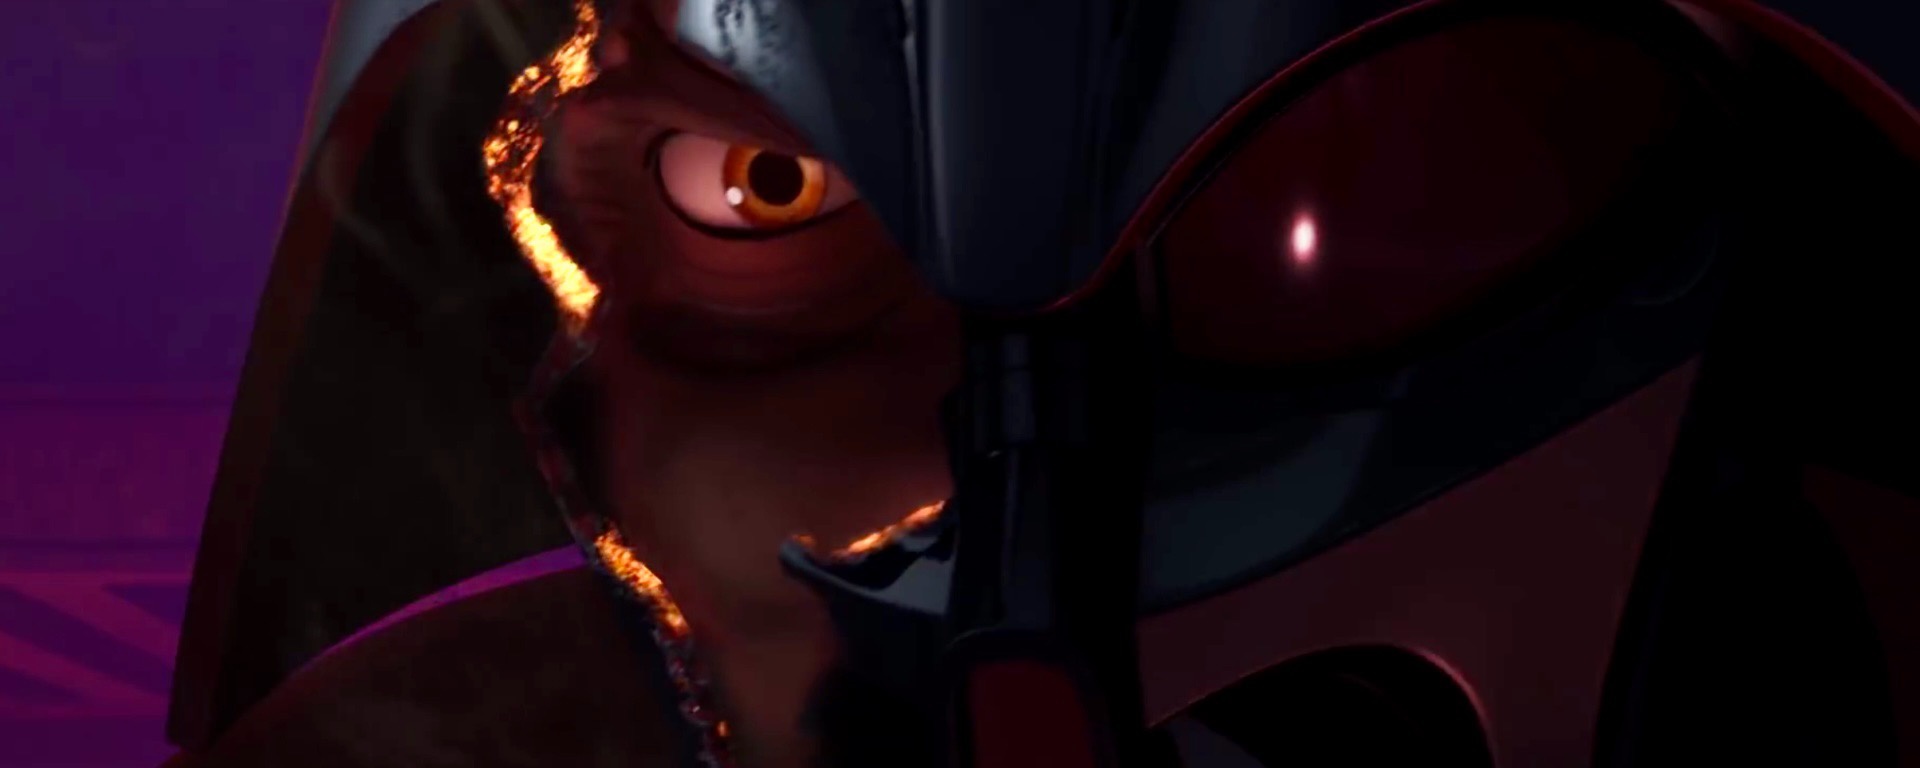 Why didn't Darth Vader try to convince Ahsoka to turn to the dark side in Rebels season 2 finale? As her master, he had a great influence on her and he didn't